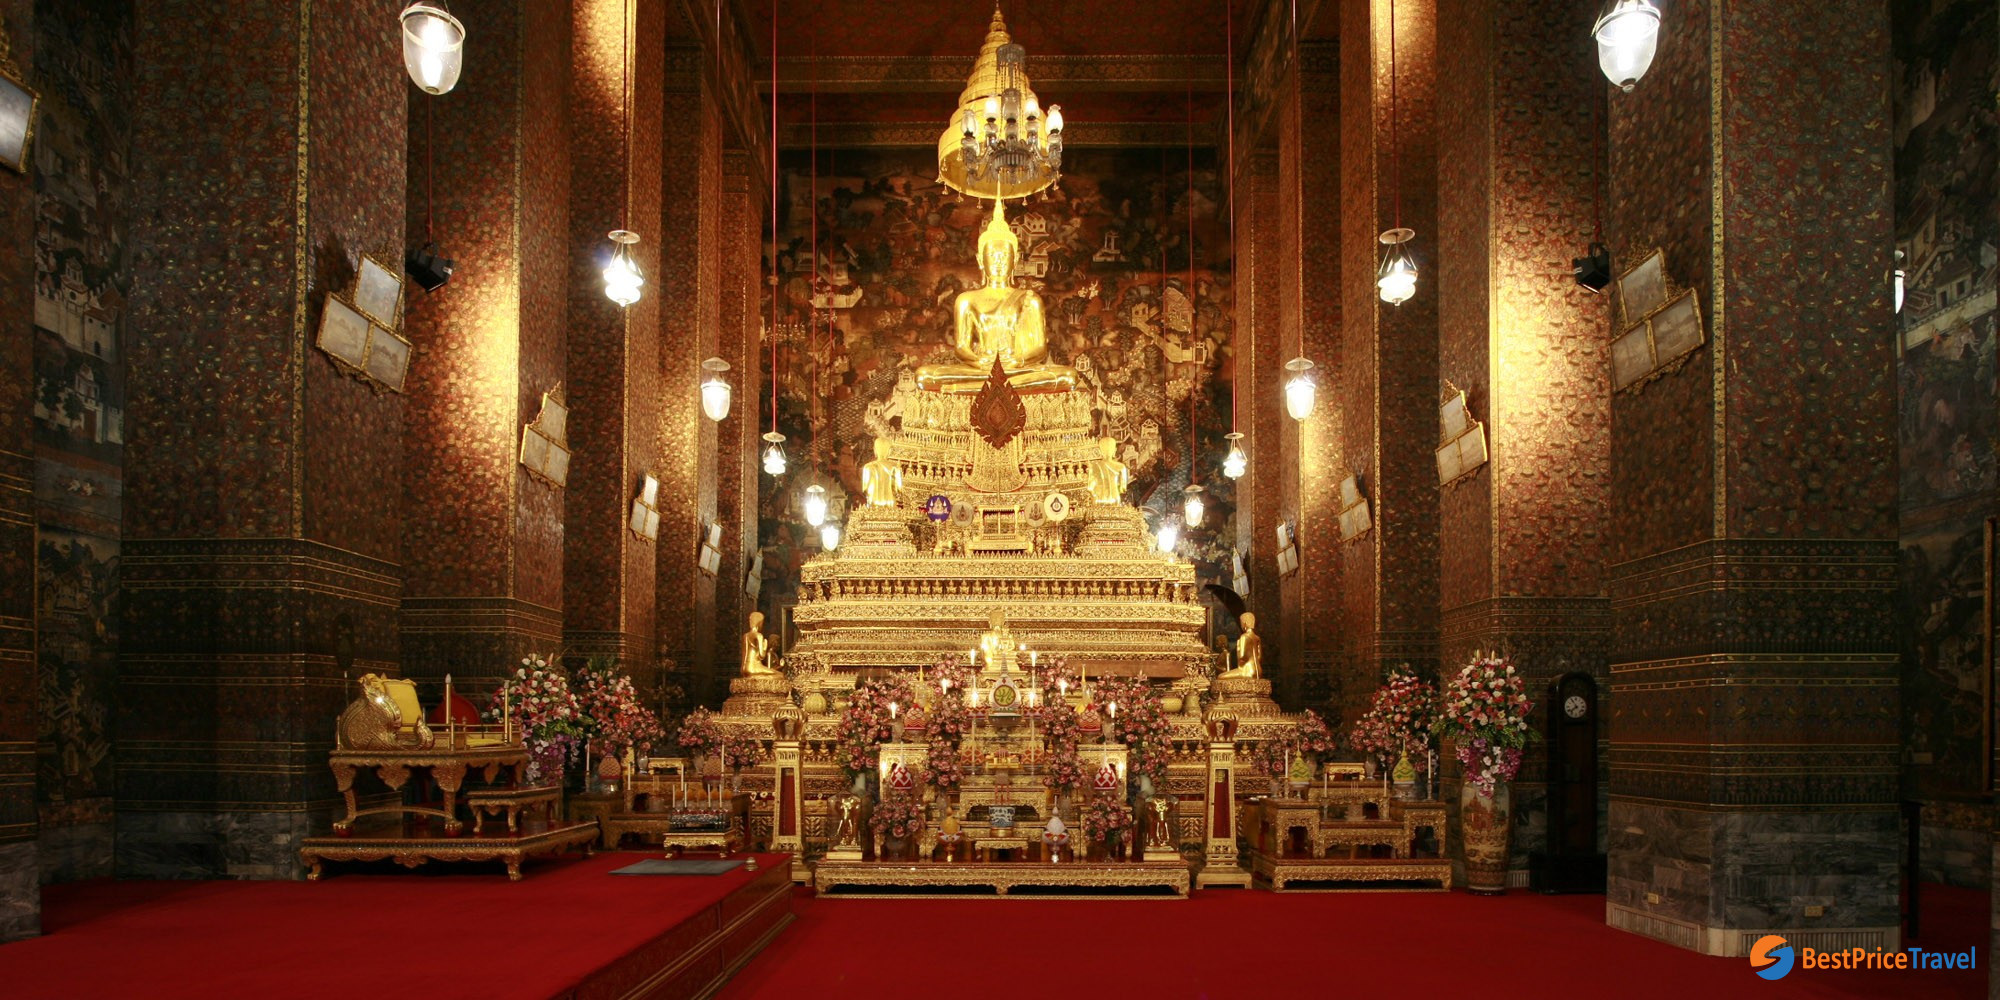 The Phra Ubosot Hall in Wat Pho